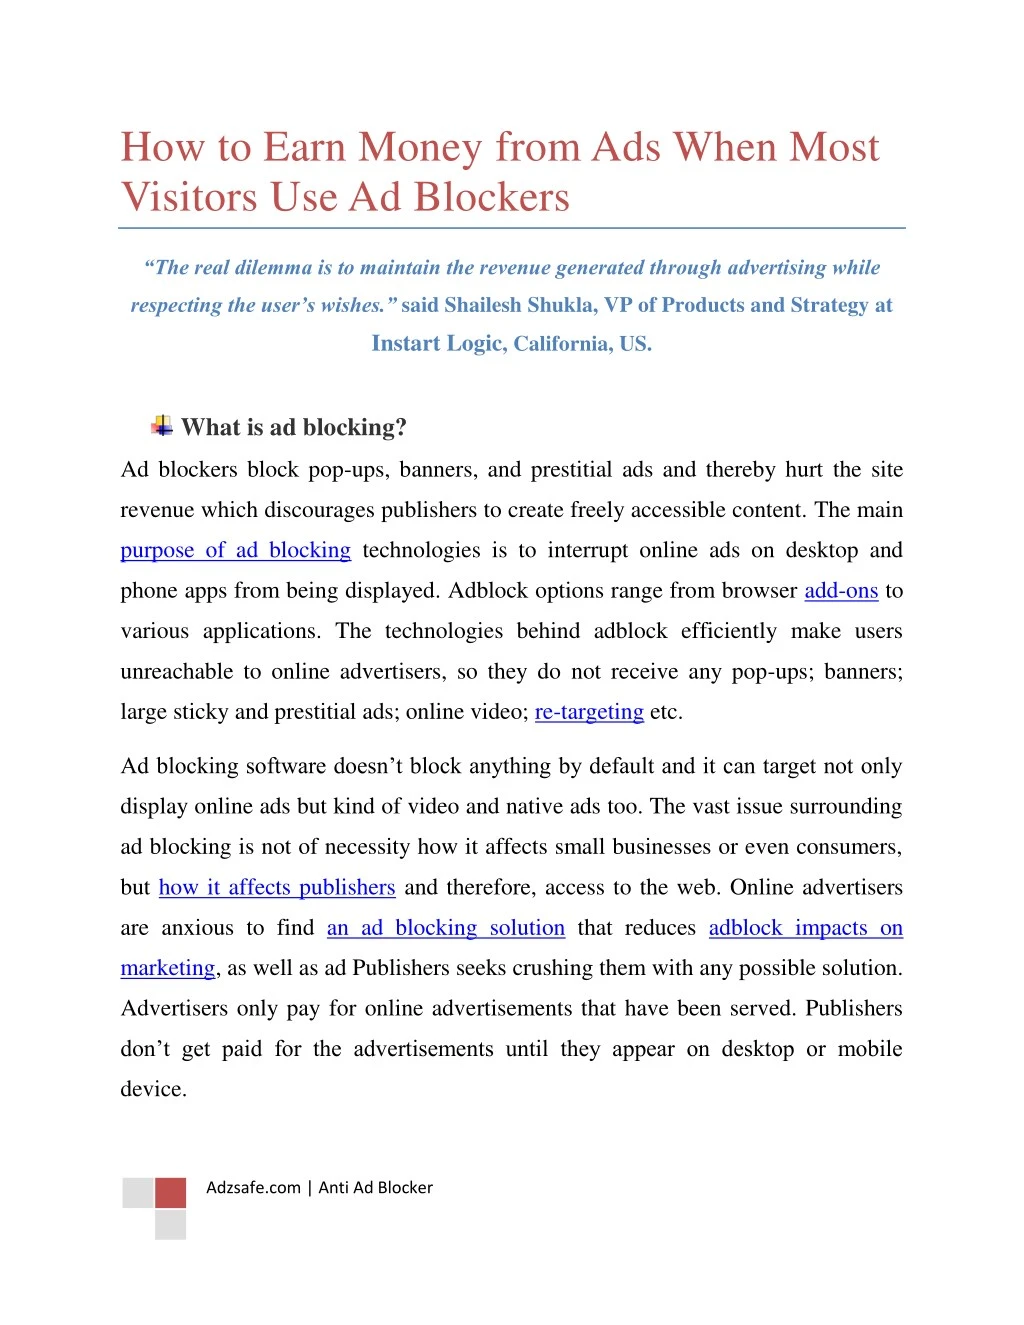 how to earn money from ads when most visitors